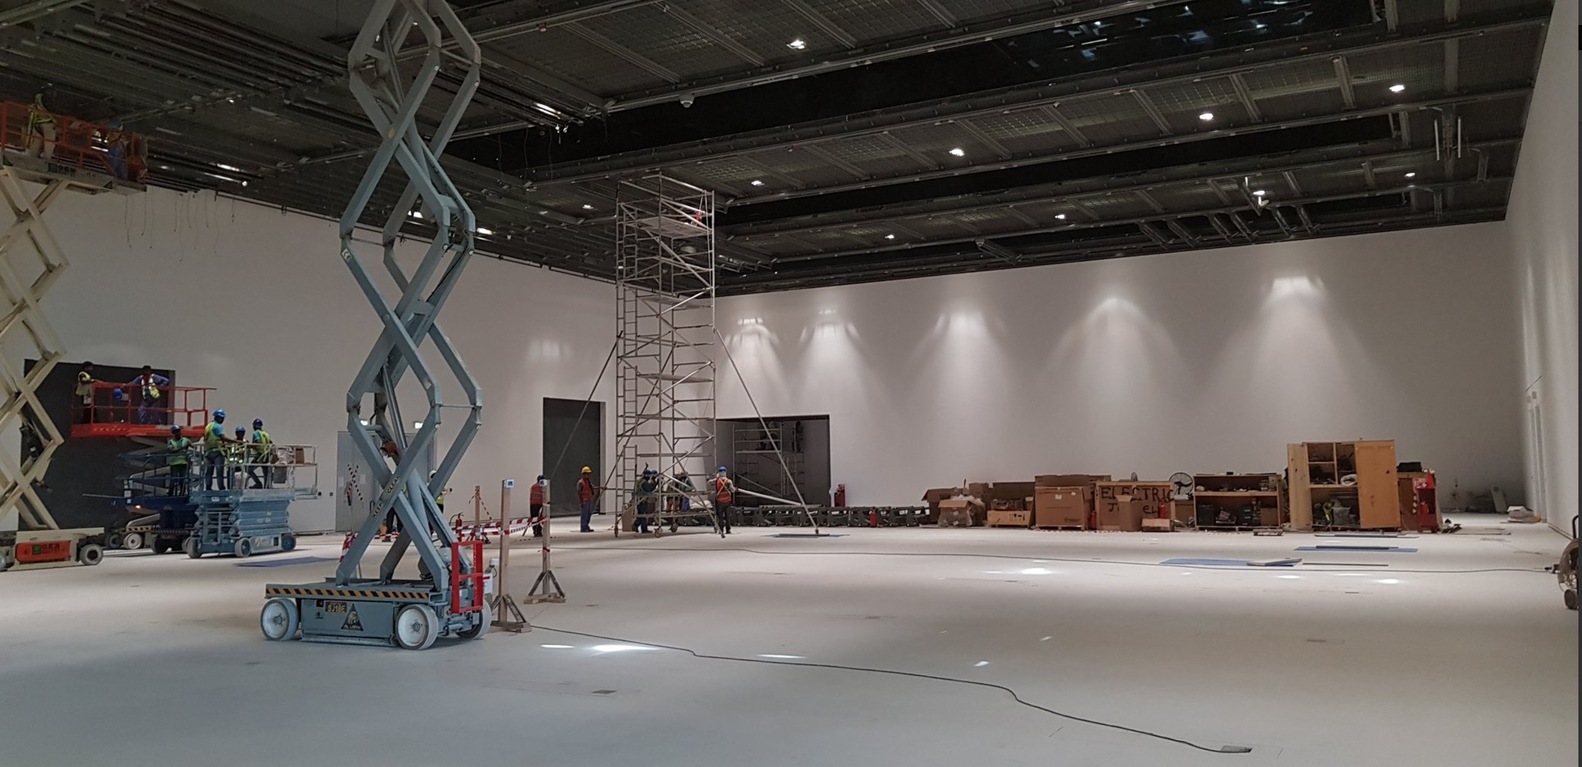 A Sneak Peek into Jean Nouvel's Louvre Abu Dhabi as It Prepares for Fall Opening,via Twitter user Ludovic Pouille